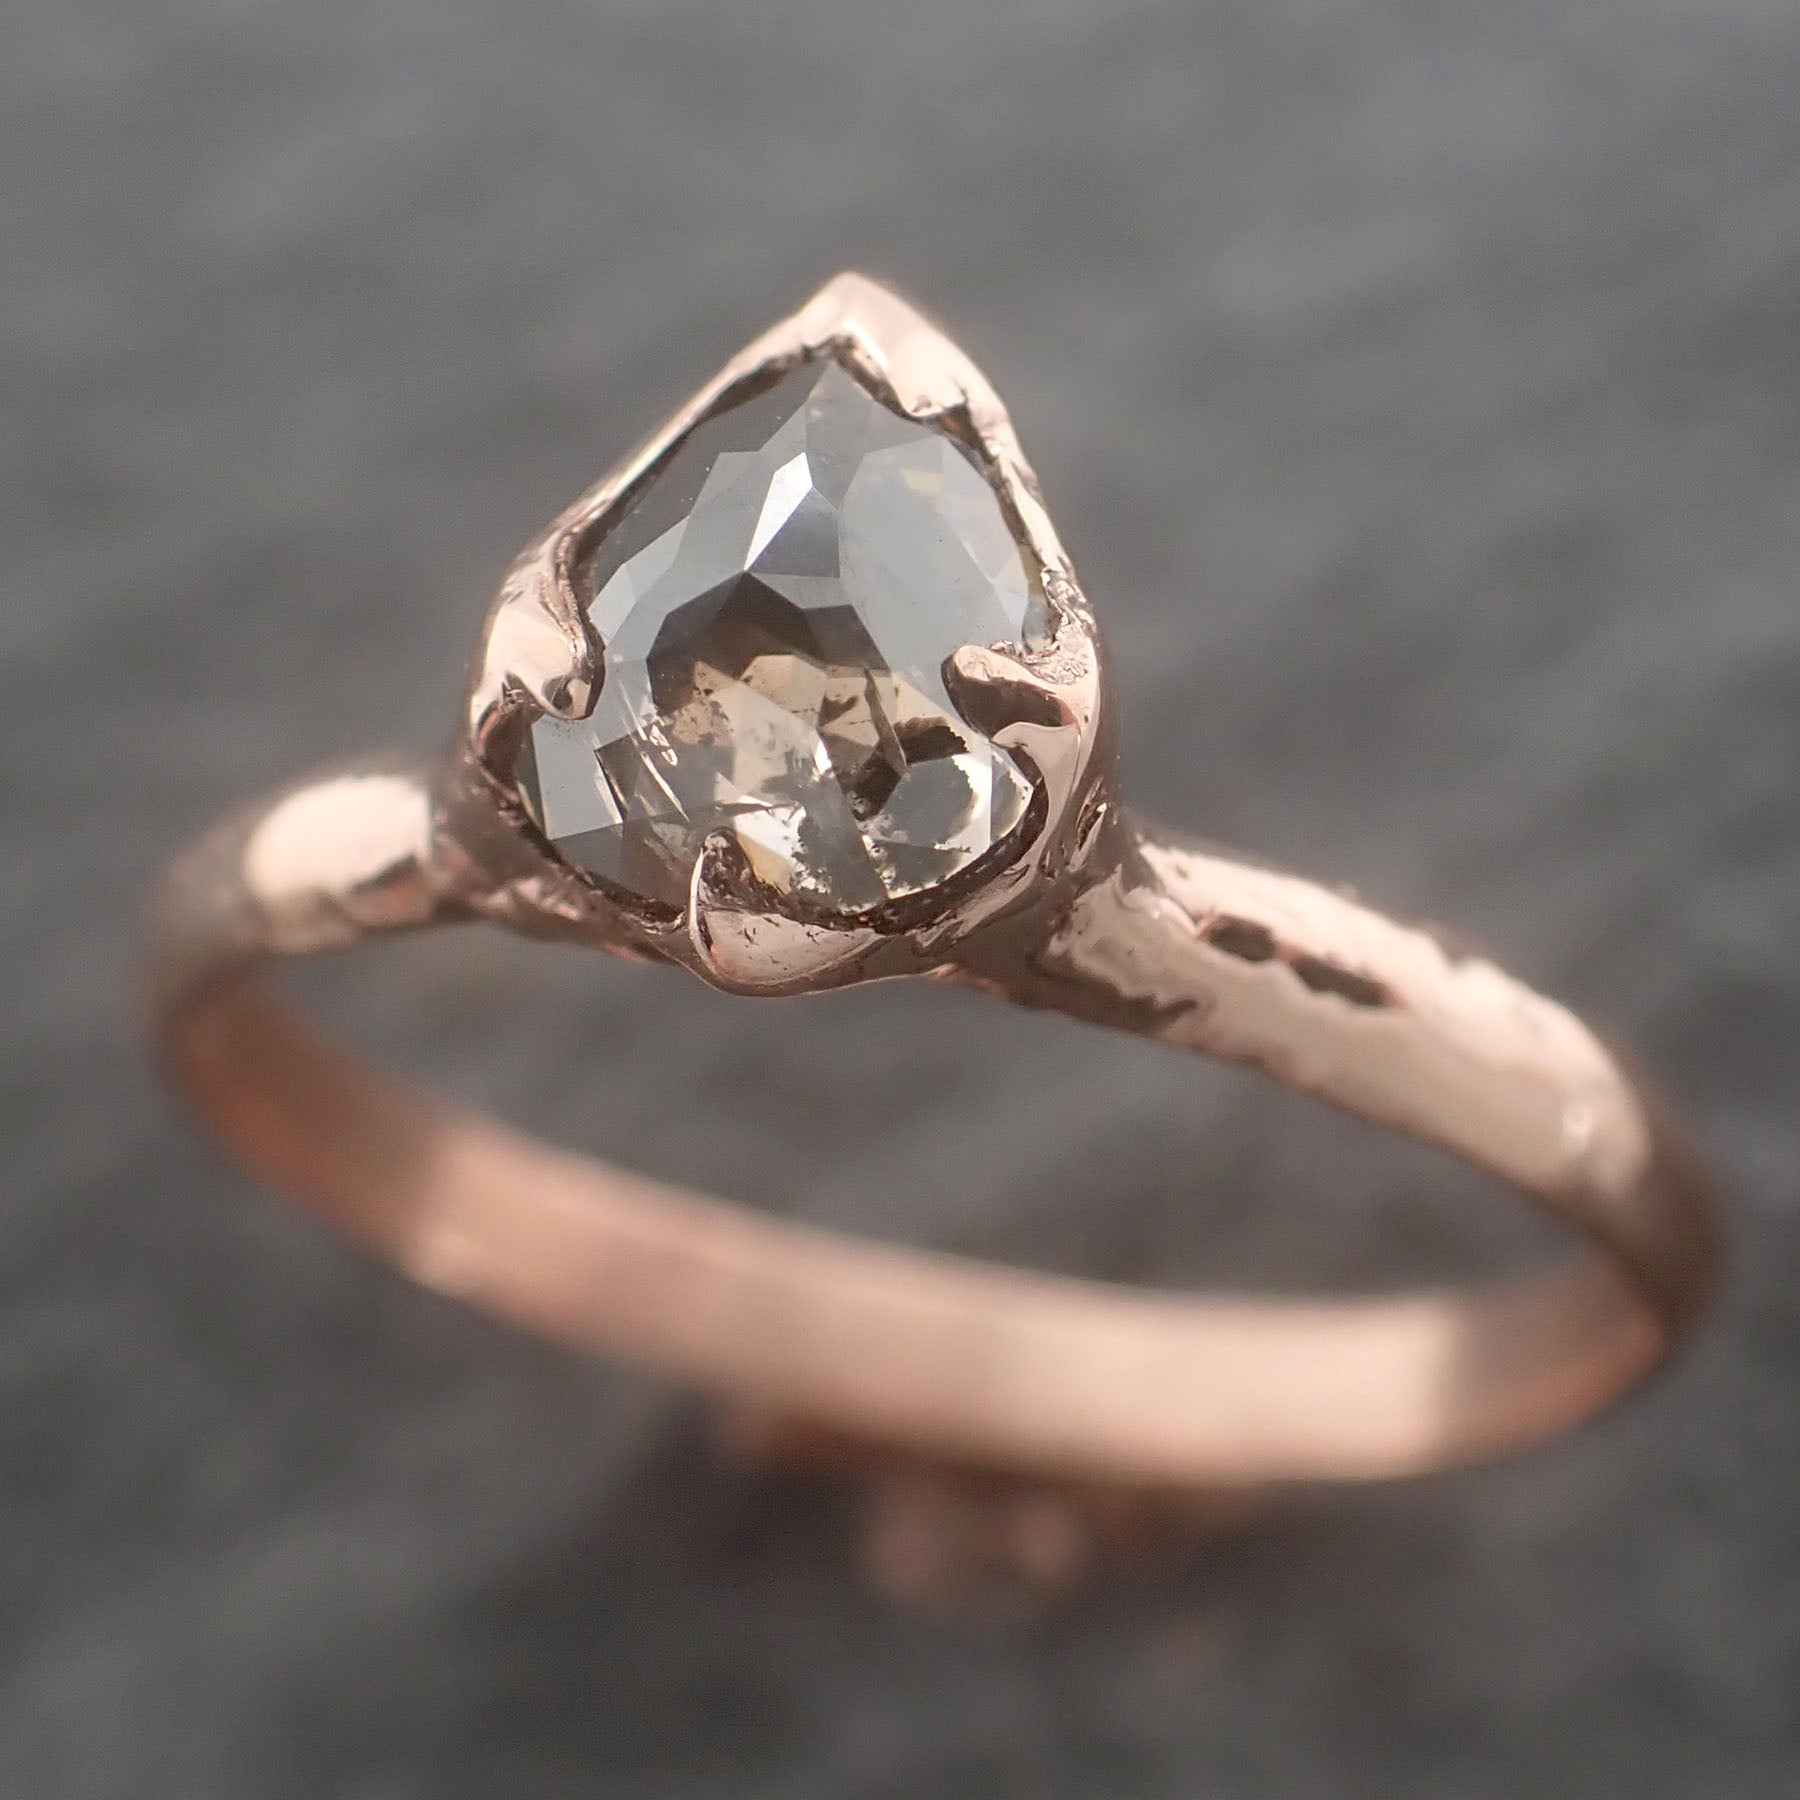 Faceted Fancy cut Salt and Pepper Diamond Solitaire Engagement 14k Rose Gold Wedding Ring byAngeline 2600